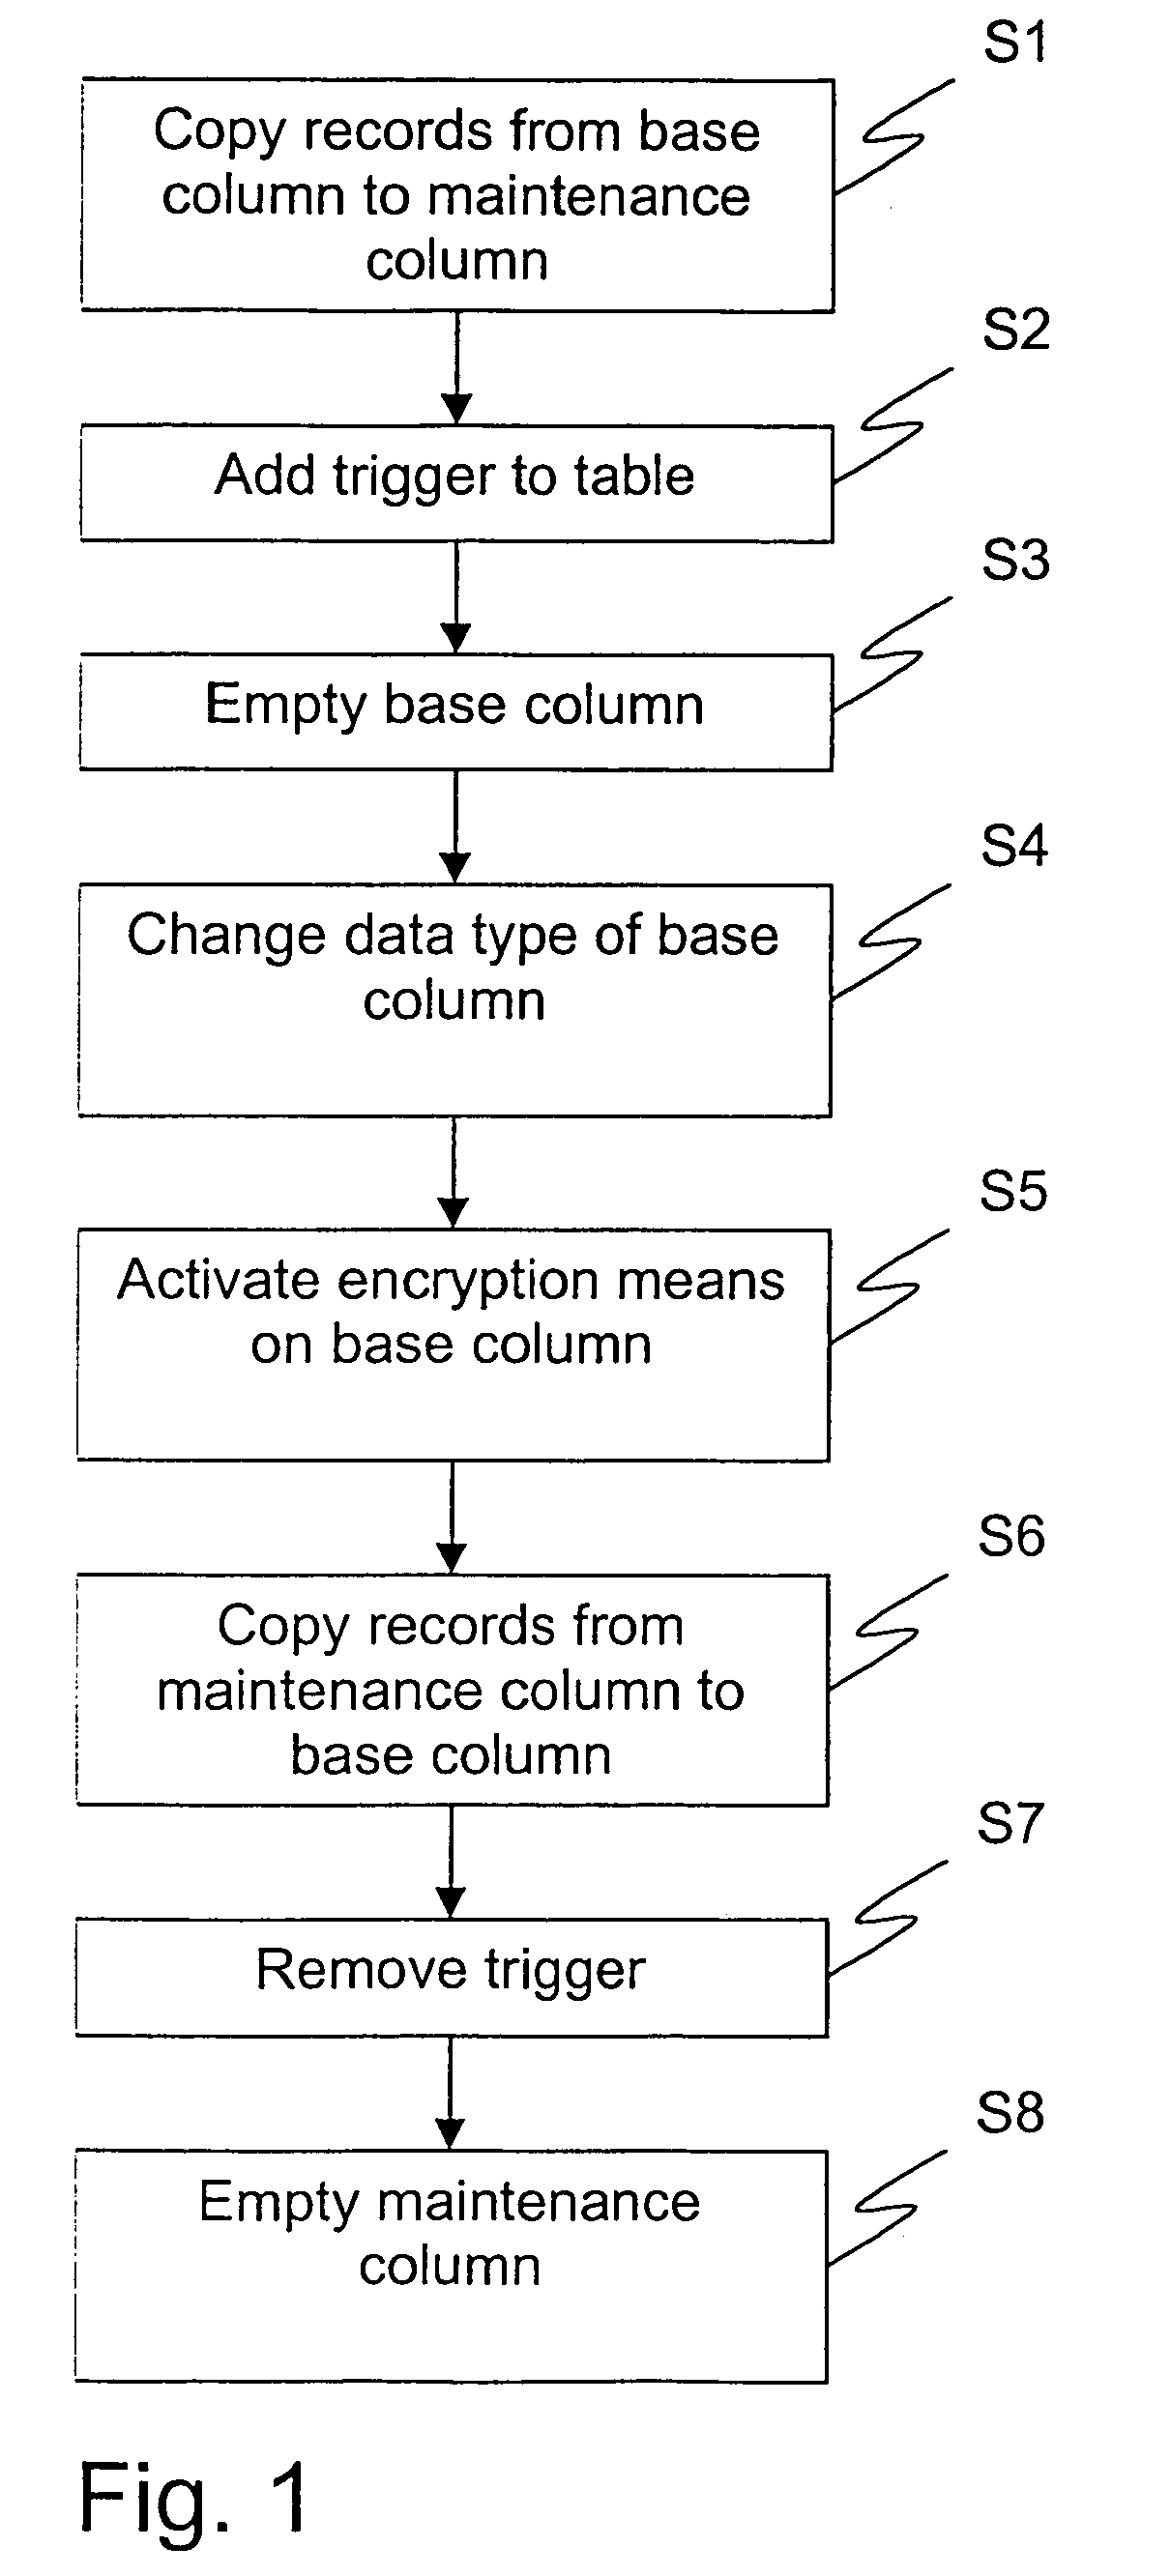 Method for altering encryption status in a relational database in a continuous process